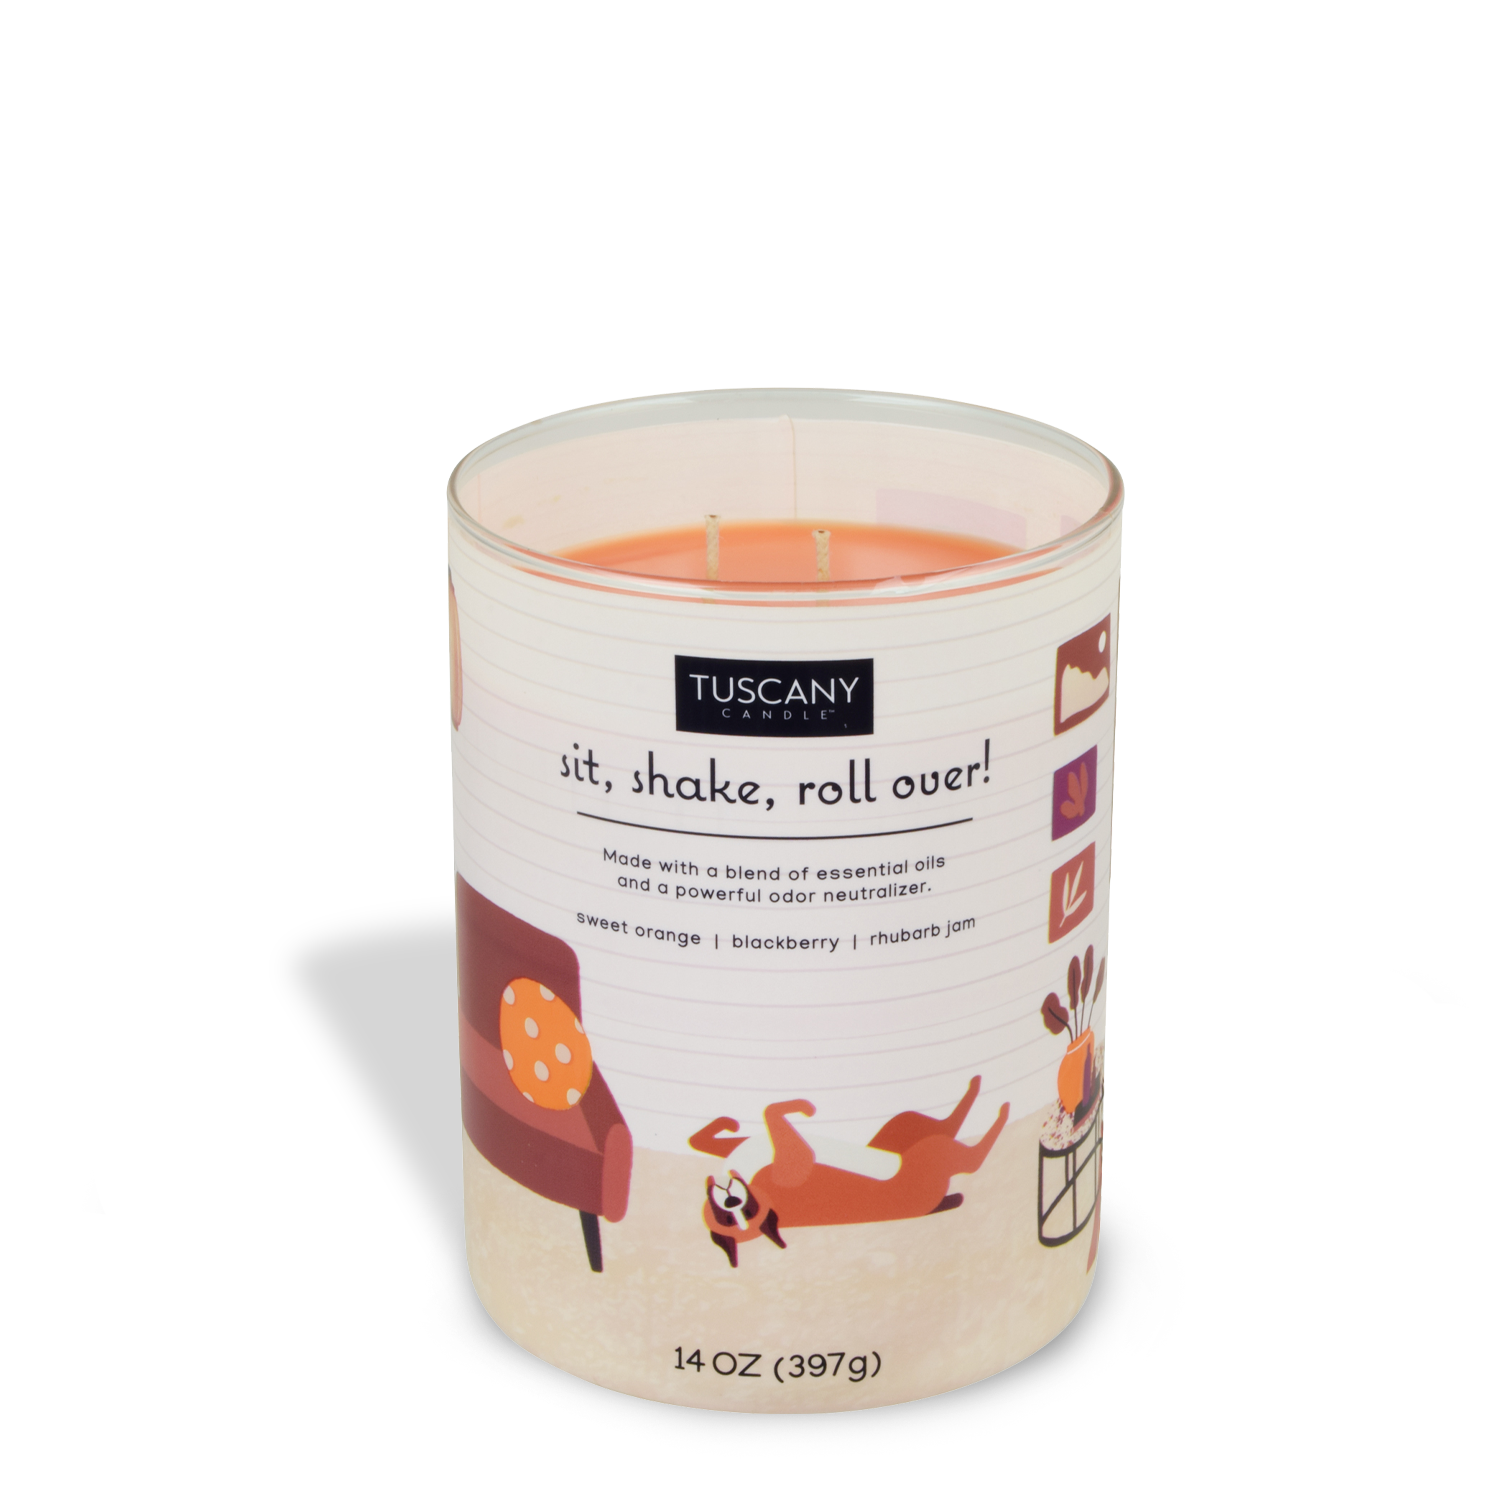 A Sit, Shake, Roll Over scented jar candle with an image of a dog and a couch, designed to neutralize pet odors, from the Tuscany Candle Pet Odor Control Collection.